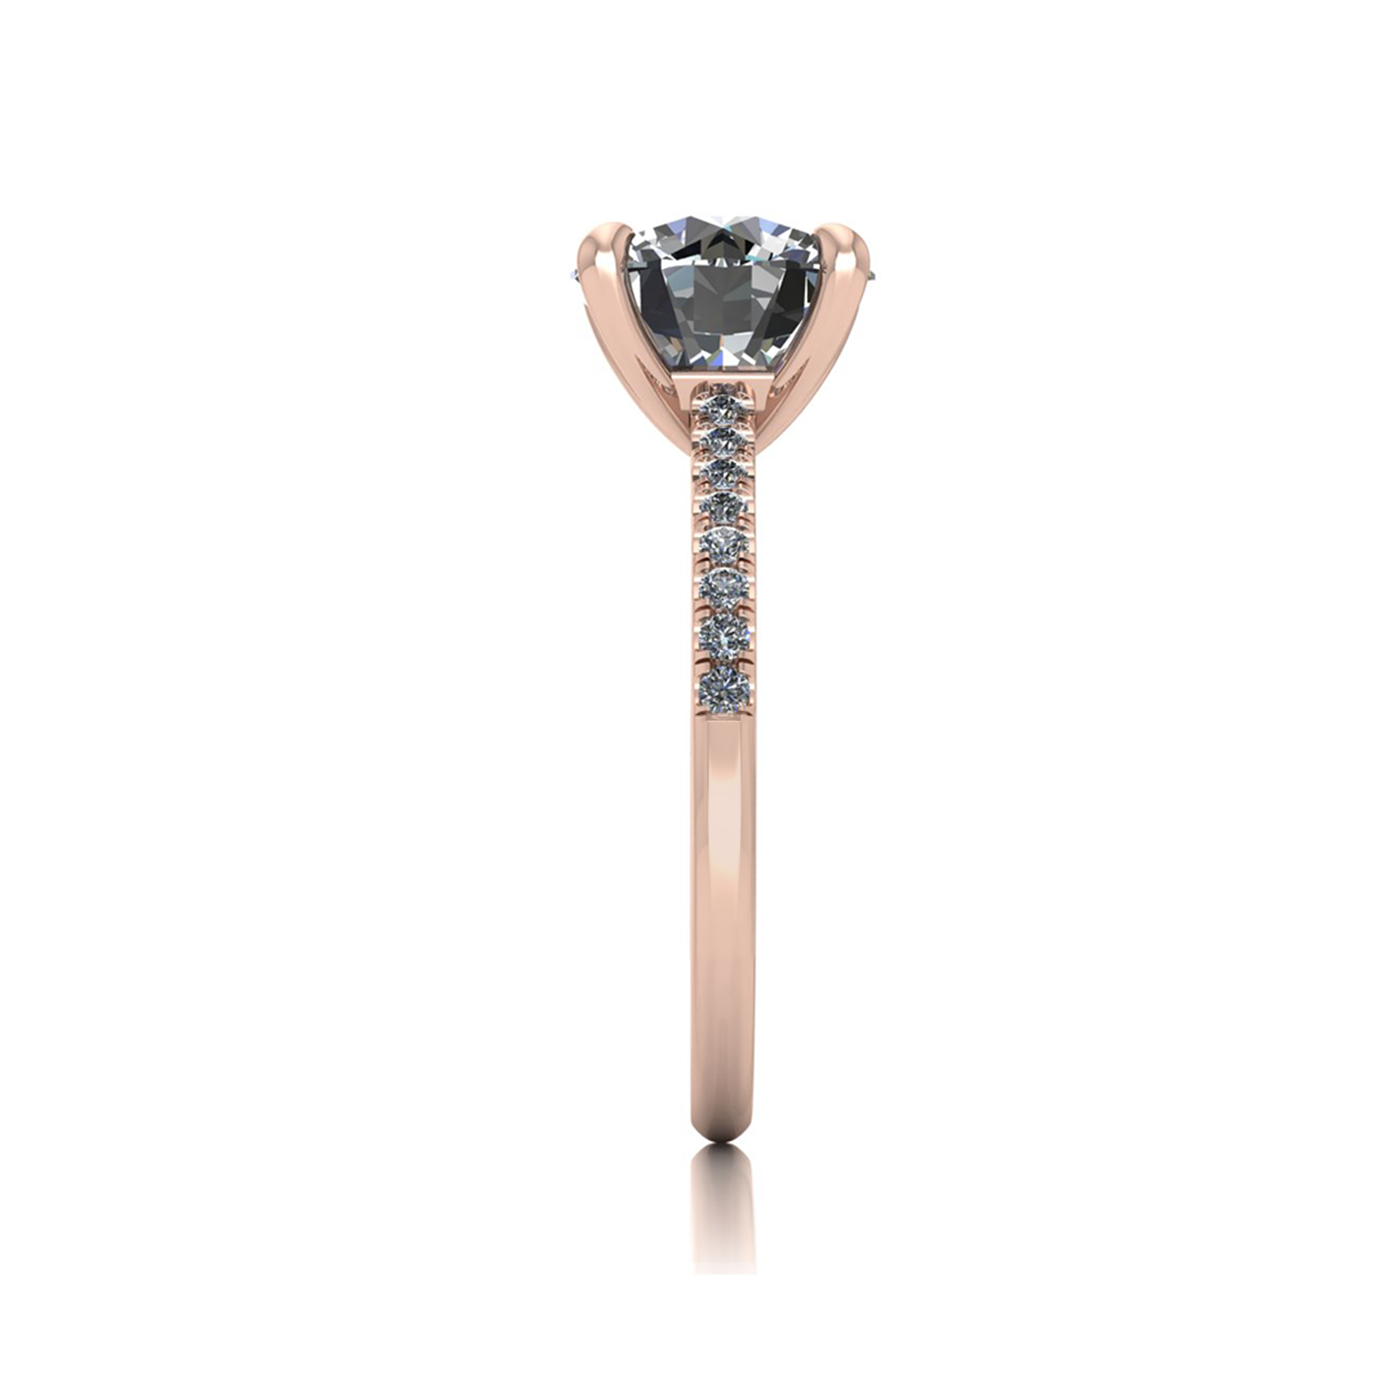 18k rose gold 2.5ct 4 prongs round cut diamond engagement ring with whisper thin pavÉ set band